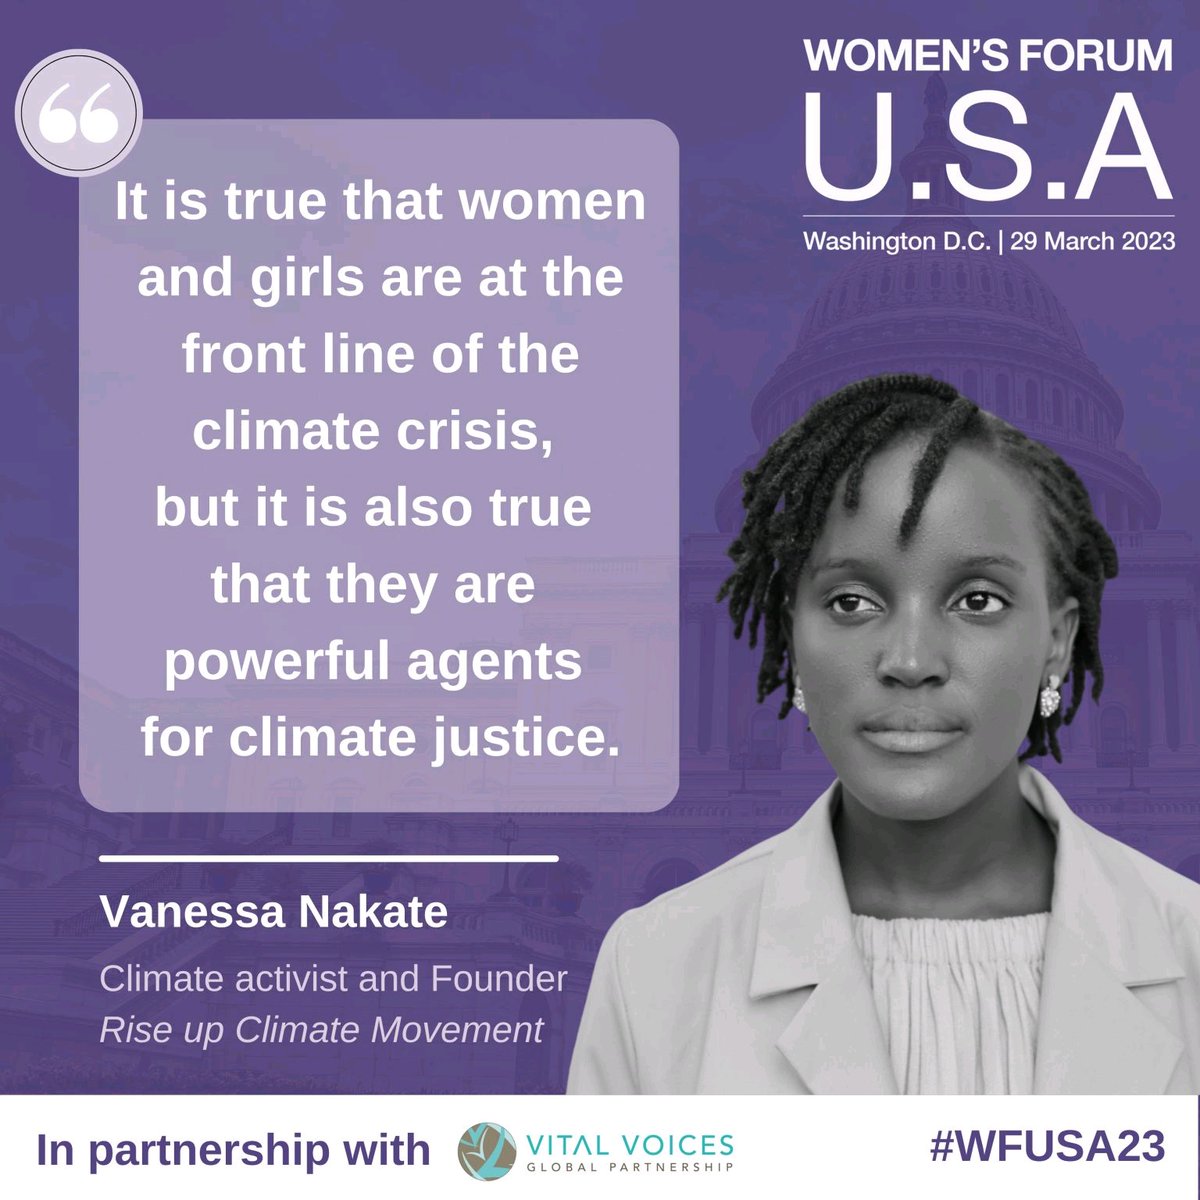 Women's voice matters for climate justice. We are on your side @vanessa_vash #Riseupmouvement